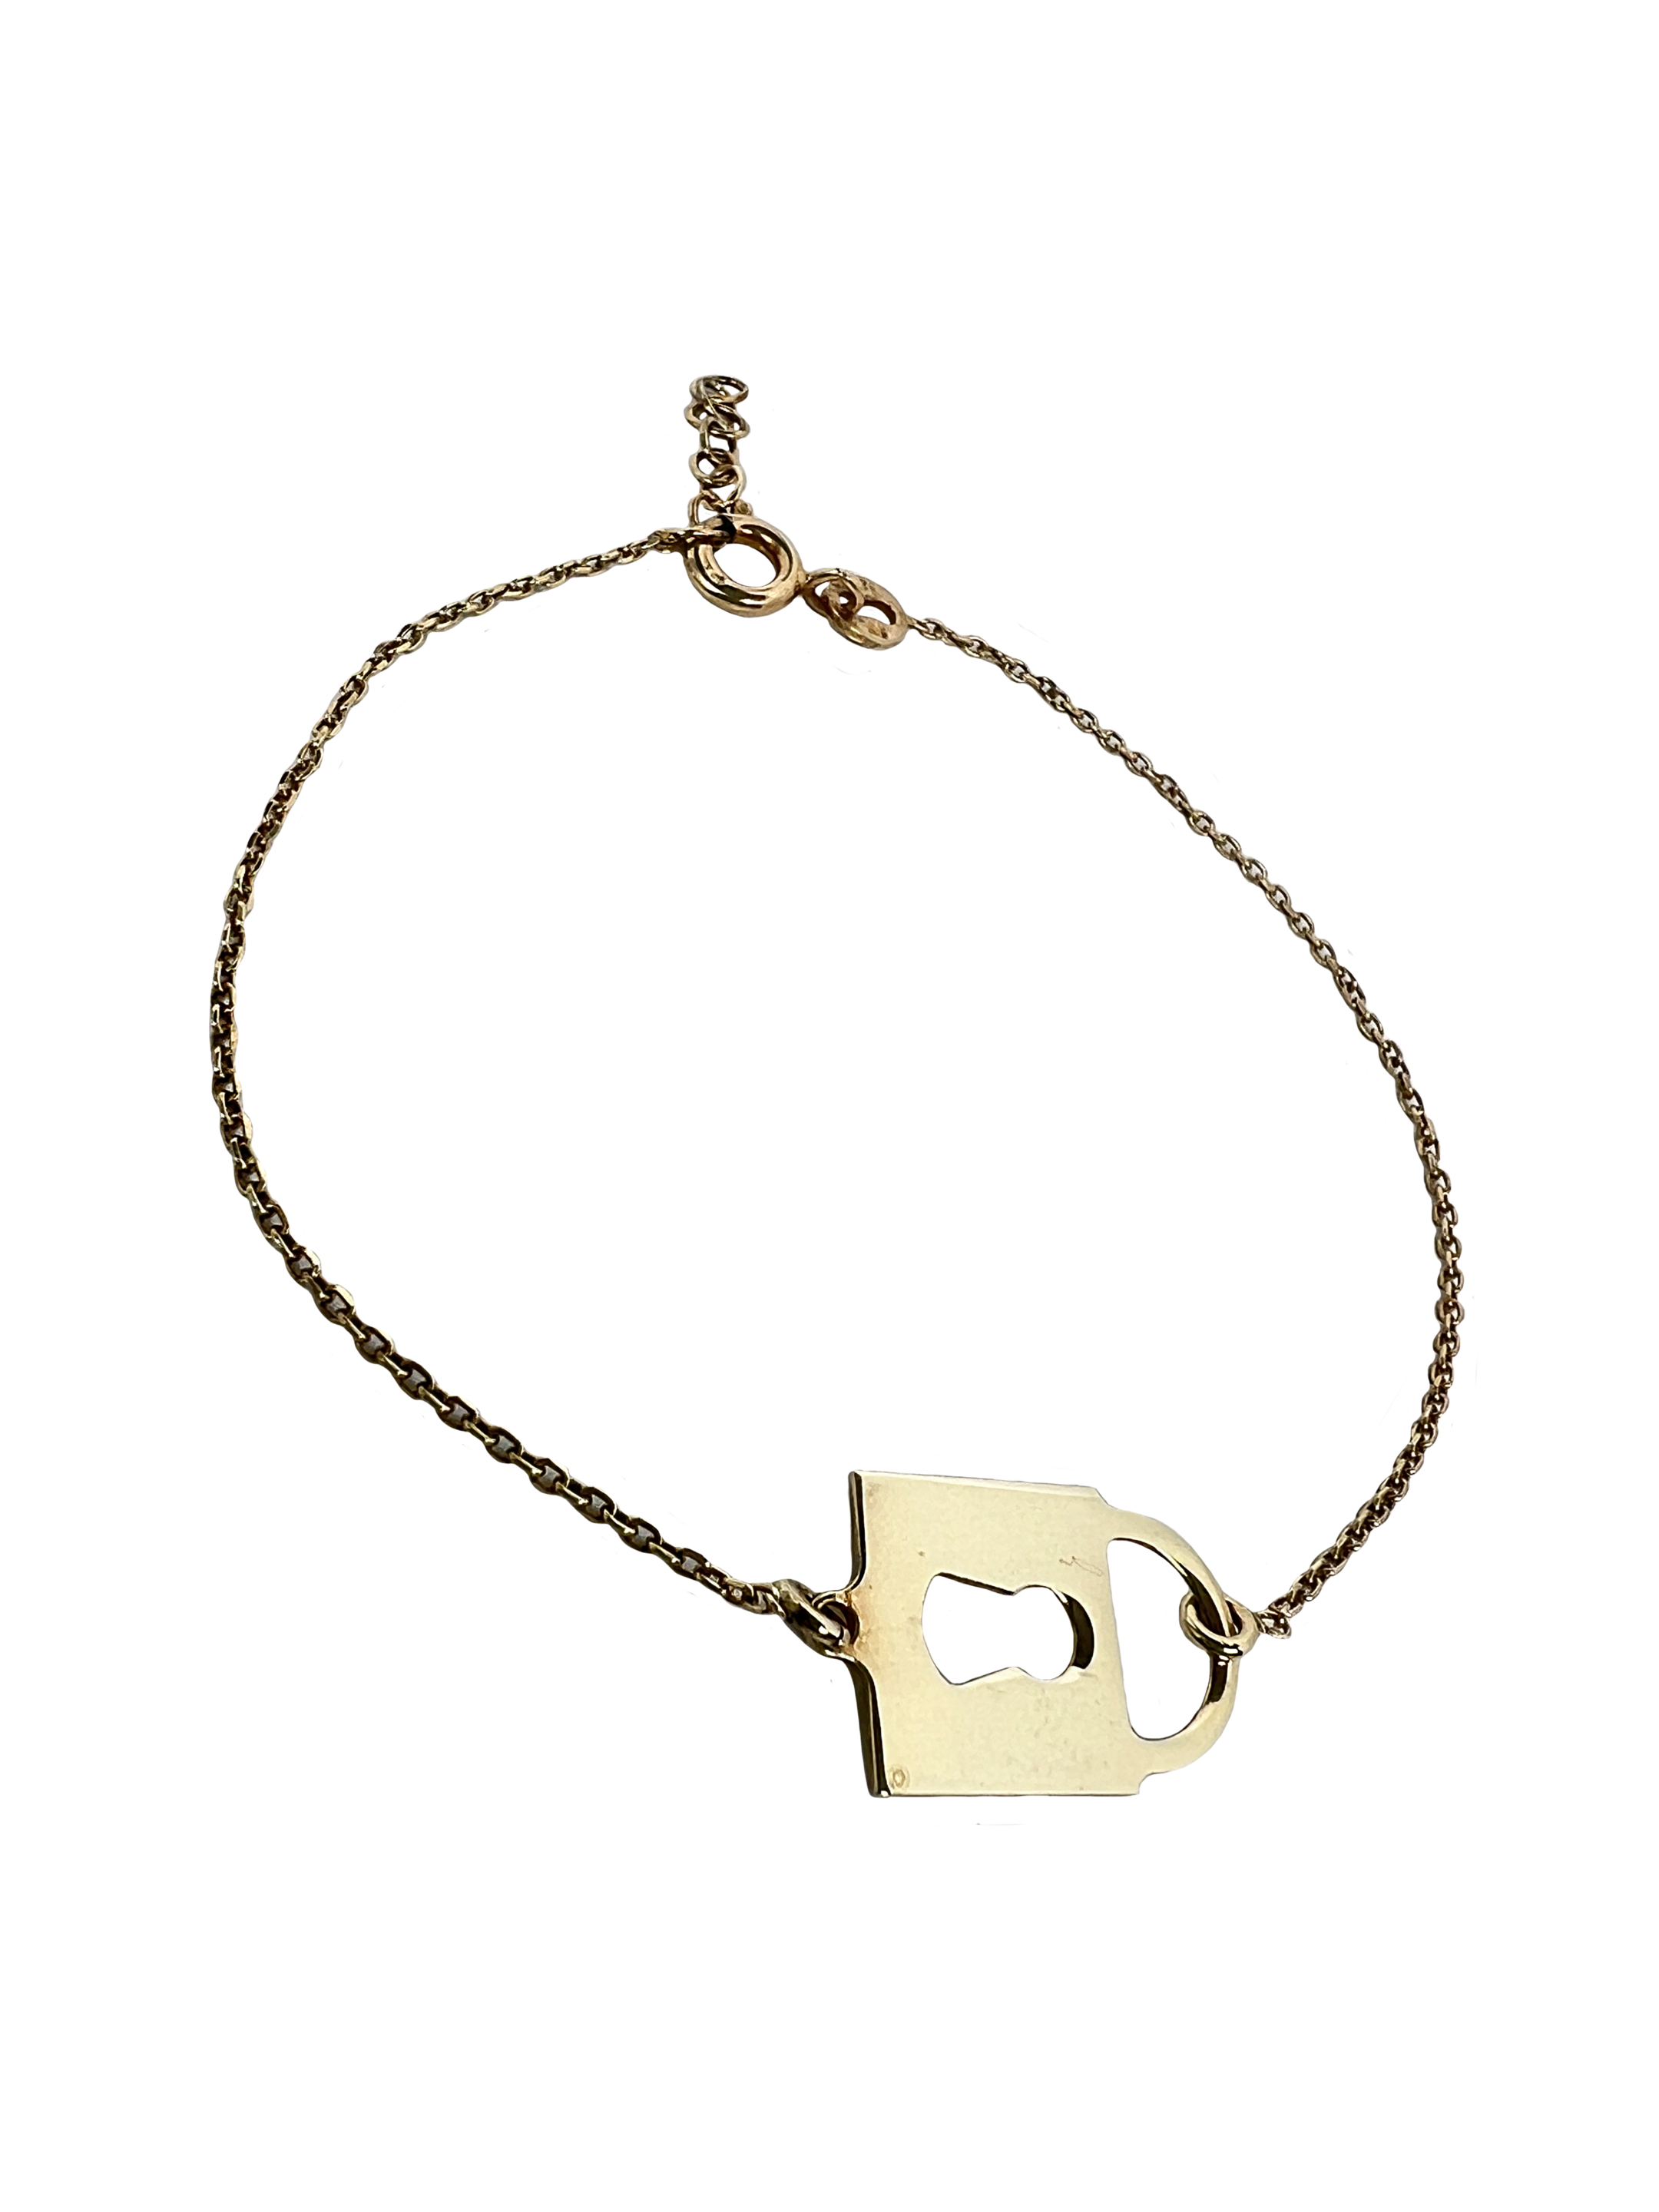 Silver bracelet with a lock finish